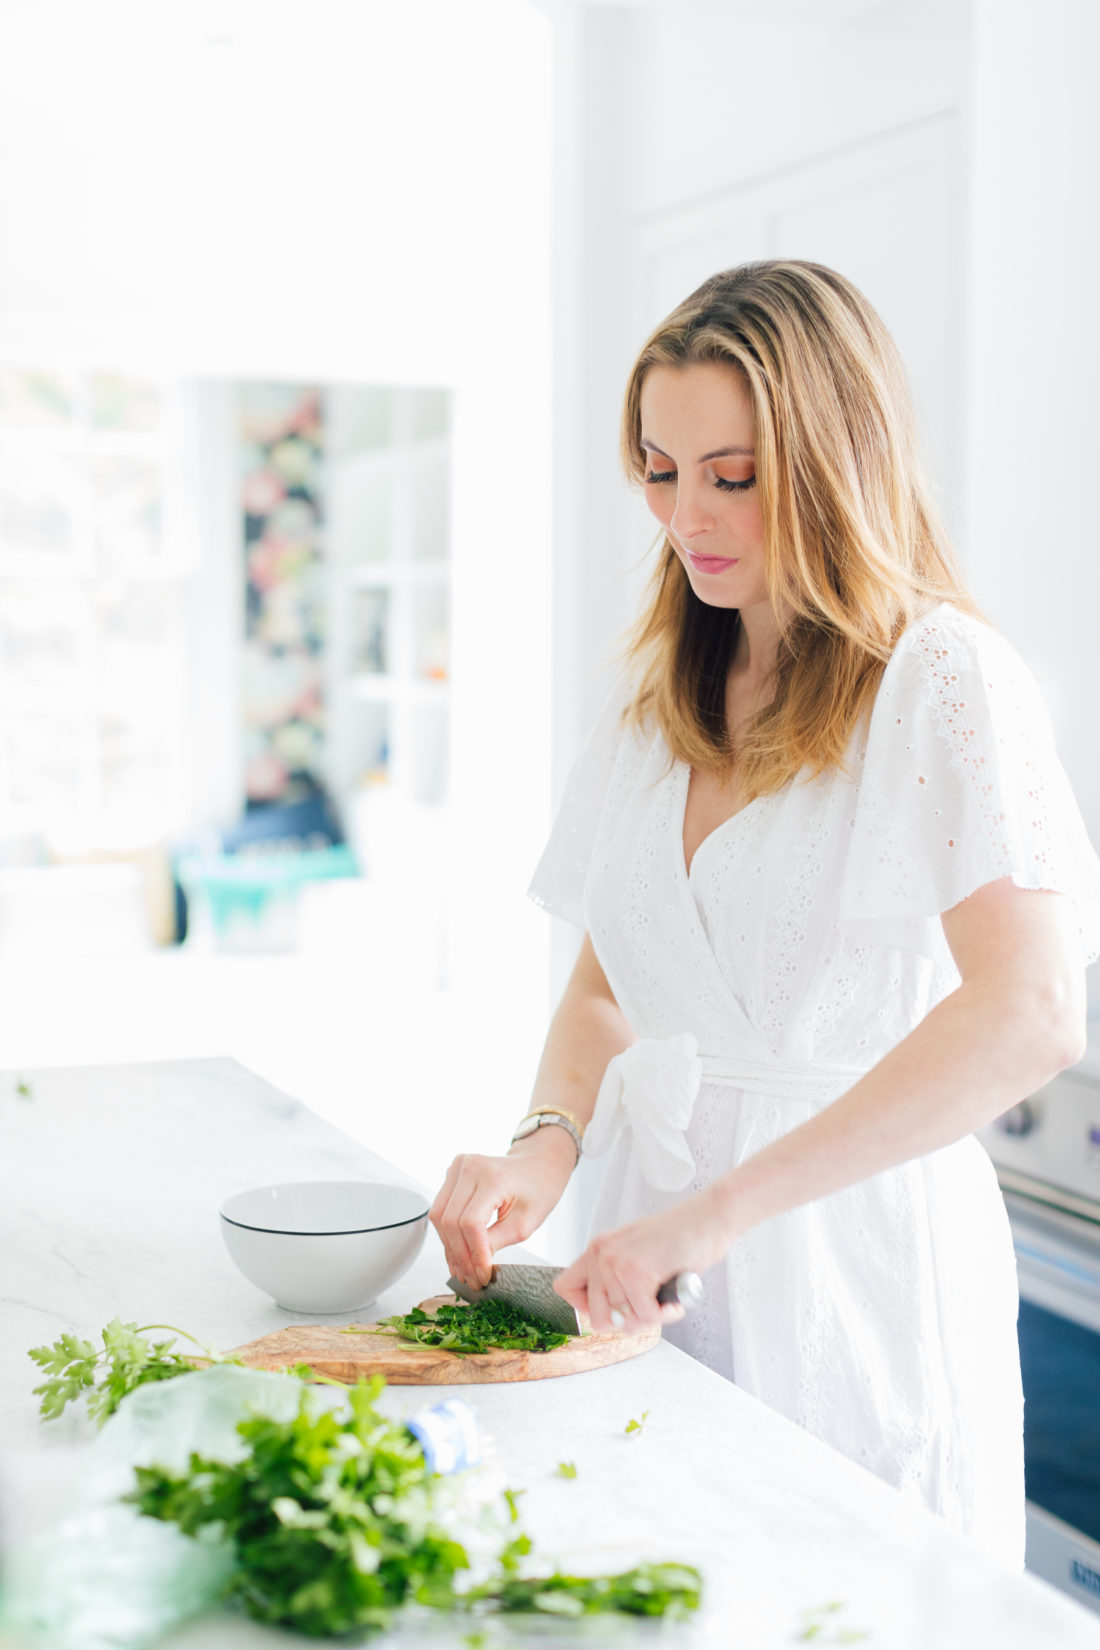 Eva Amurri Martino of Happily Eva After shares her Mother's Day Brunch table